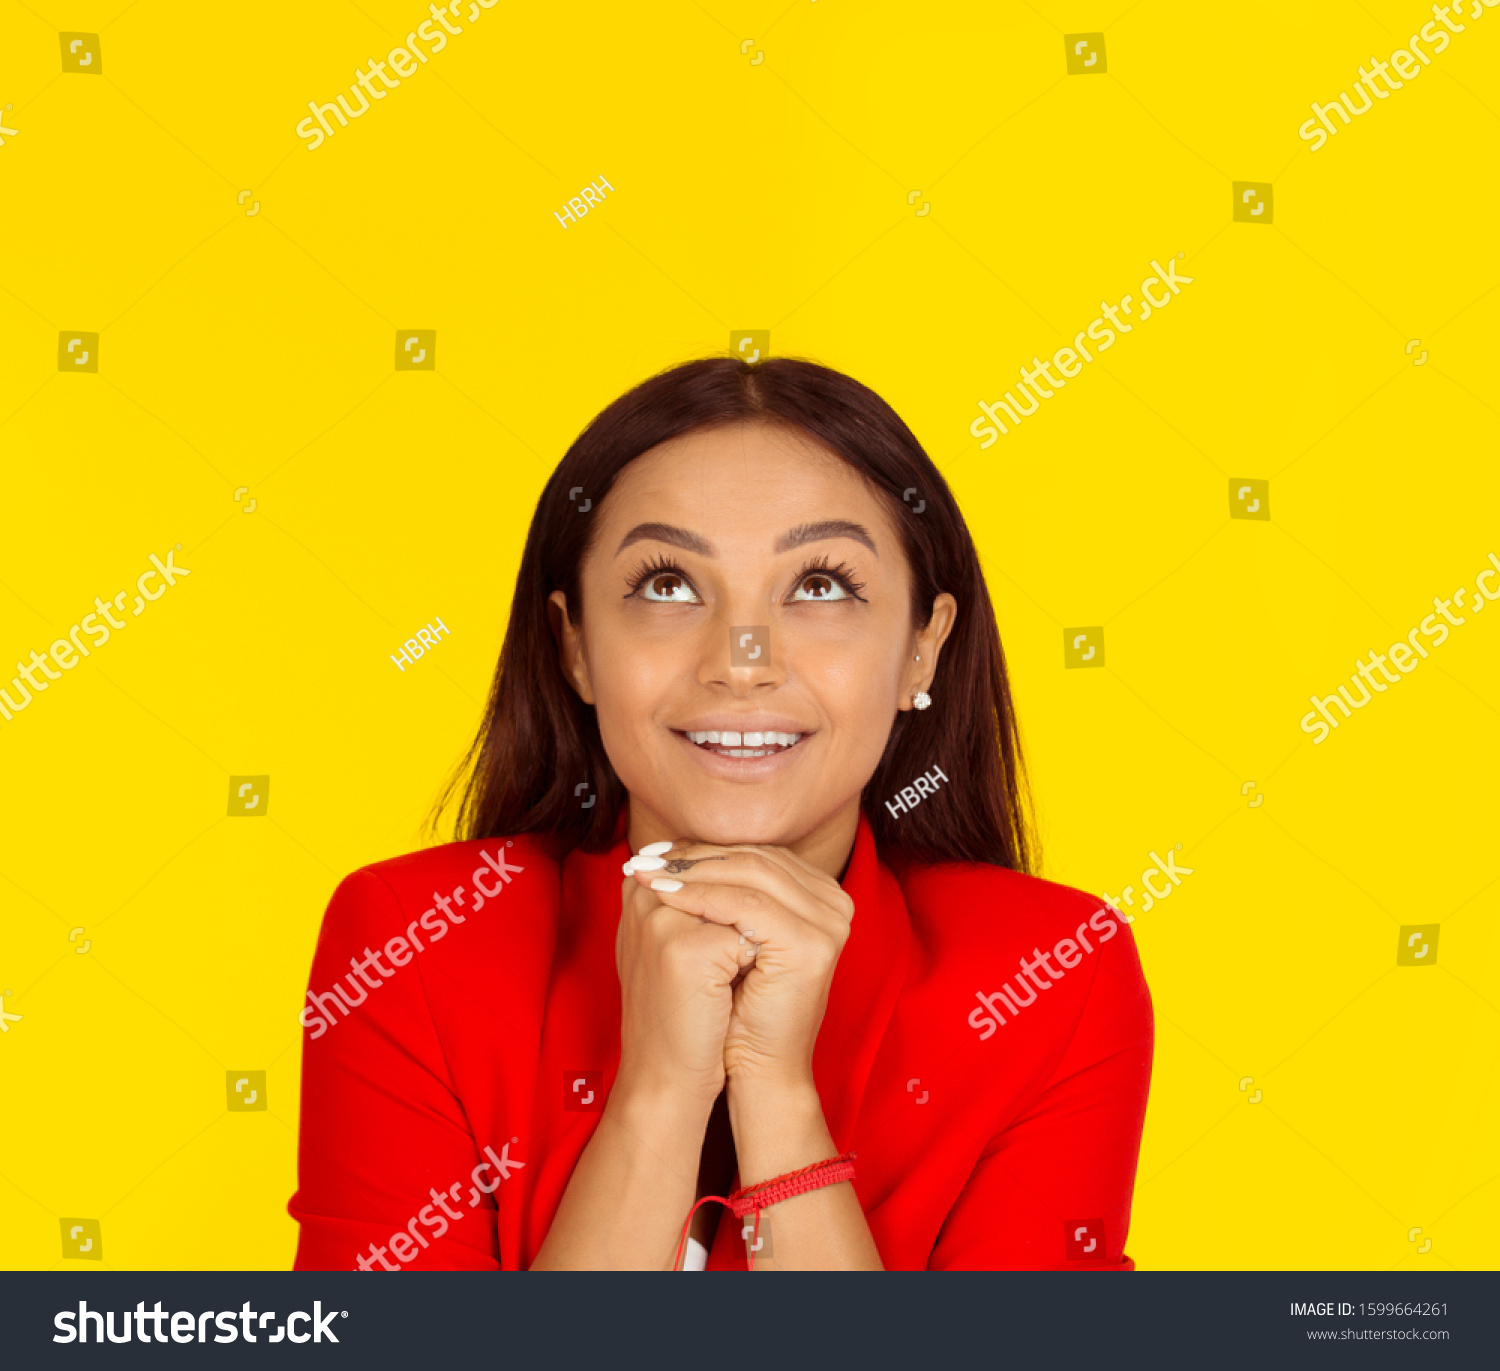 Thinking business woman looking up smiling happy. Mixed race model isolated on yellow background with copy space. Horizontal image. #1599664261